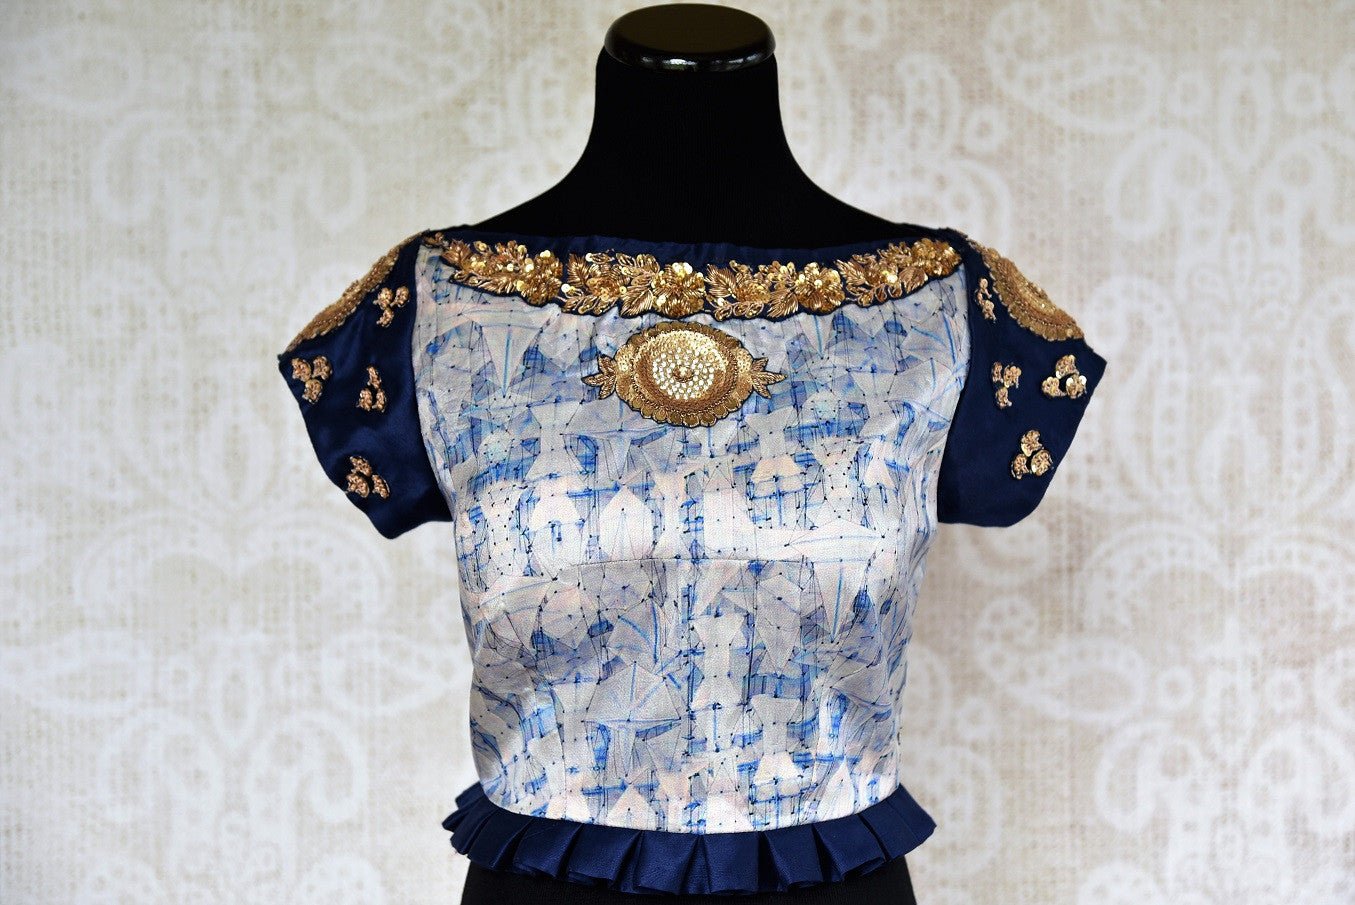 Buy stylish blue silk saree blouse online with zardozi embroidery. Pure Elegance brings Indian saree blouses online and in store for women in USA with stylish designs.-front